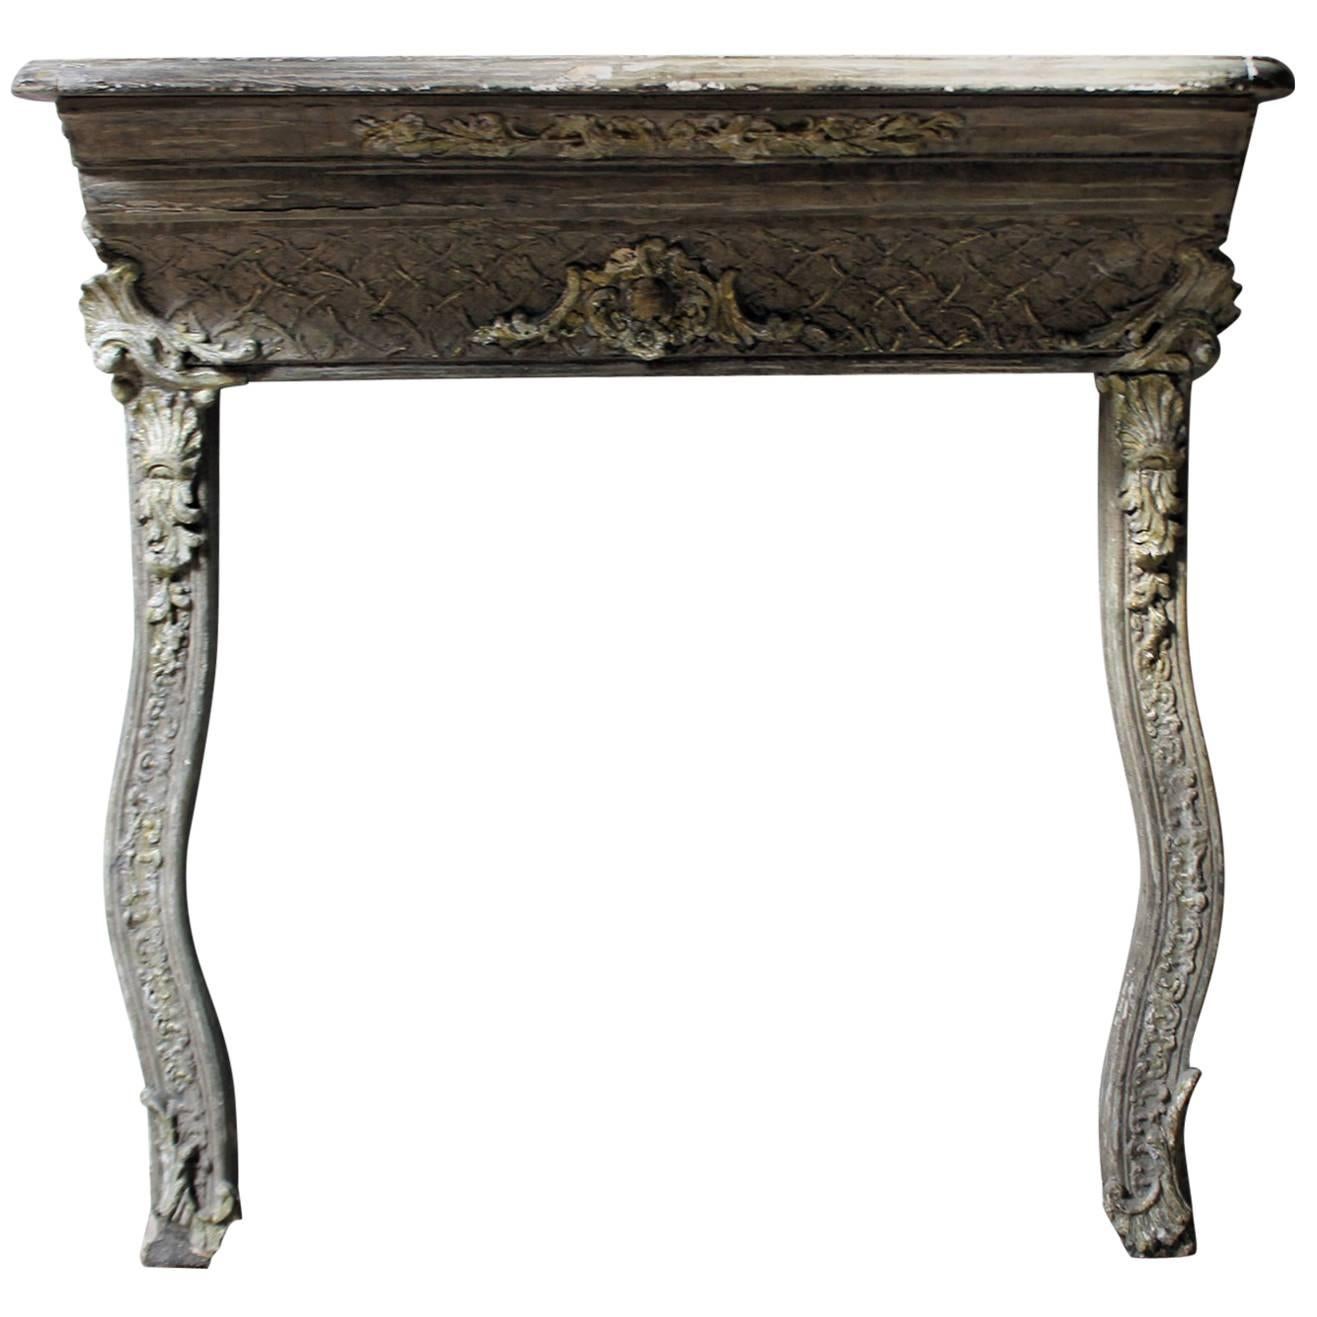 French Painted Giltwood & Gesso Fireplace Surround / Console Table, circa 1880